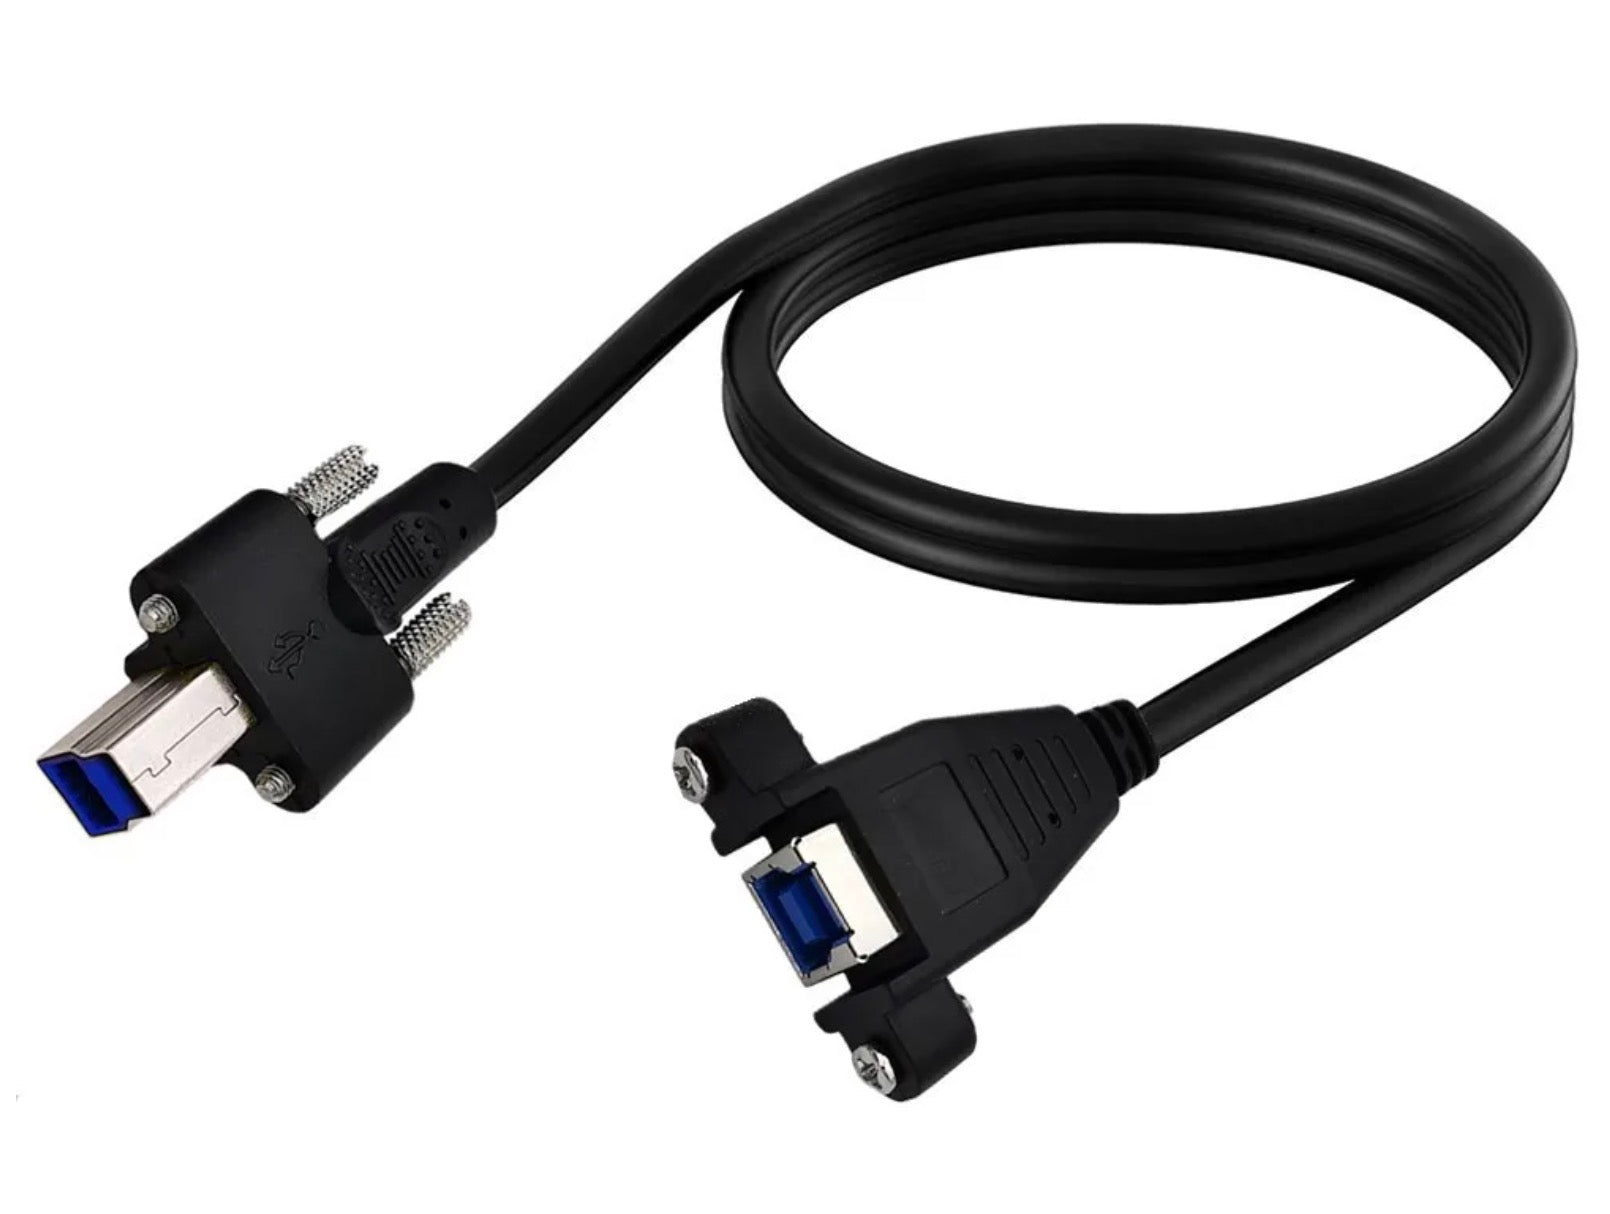 USB 3.0 B Male to Female Panel Mount Printer Extension Cable